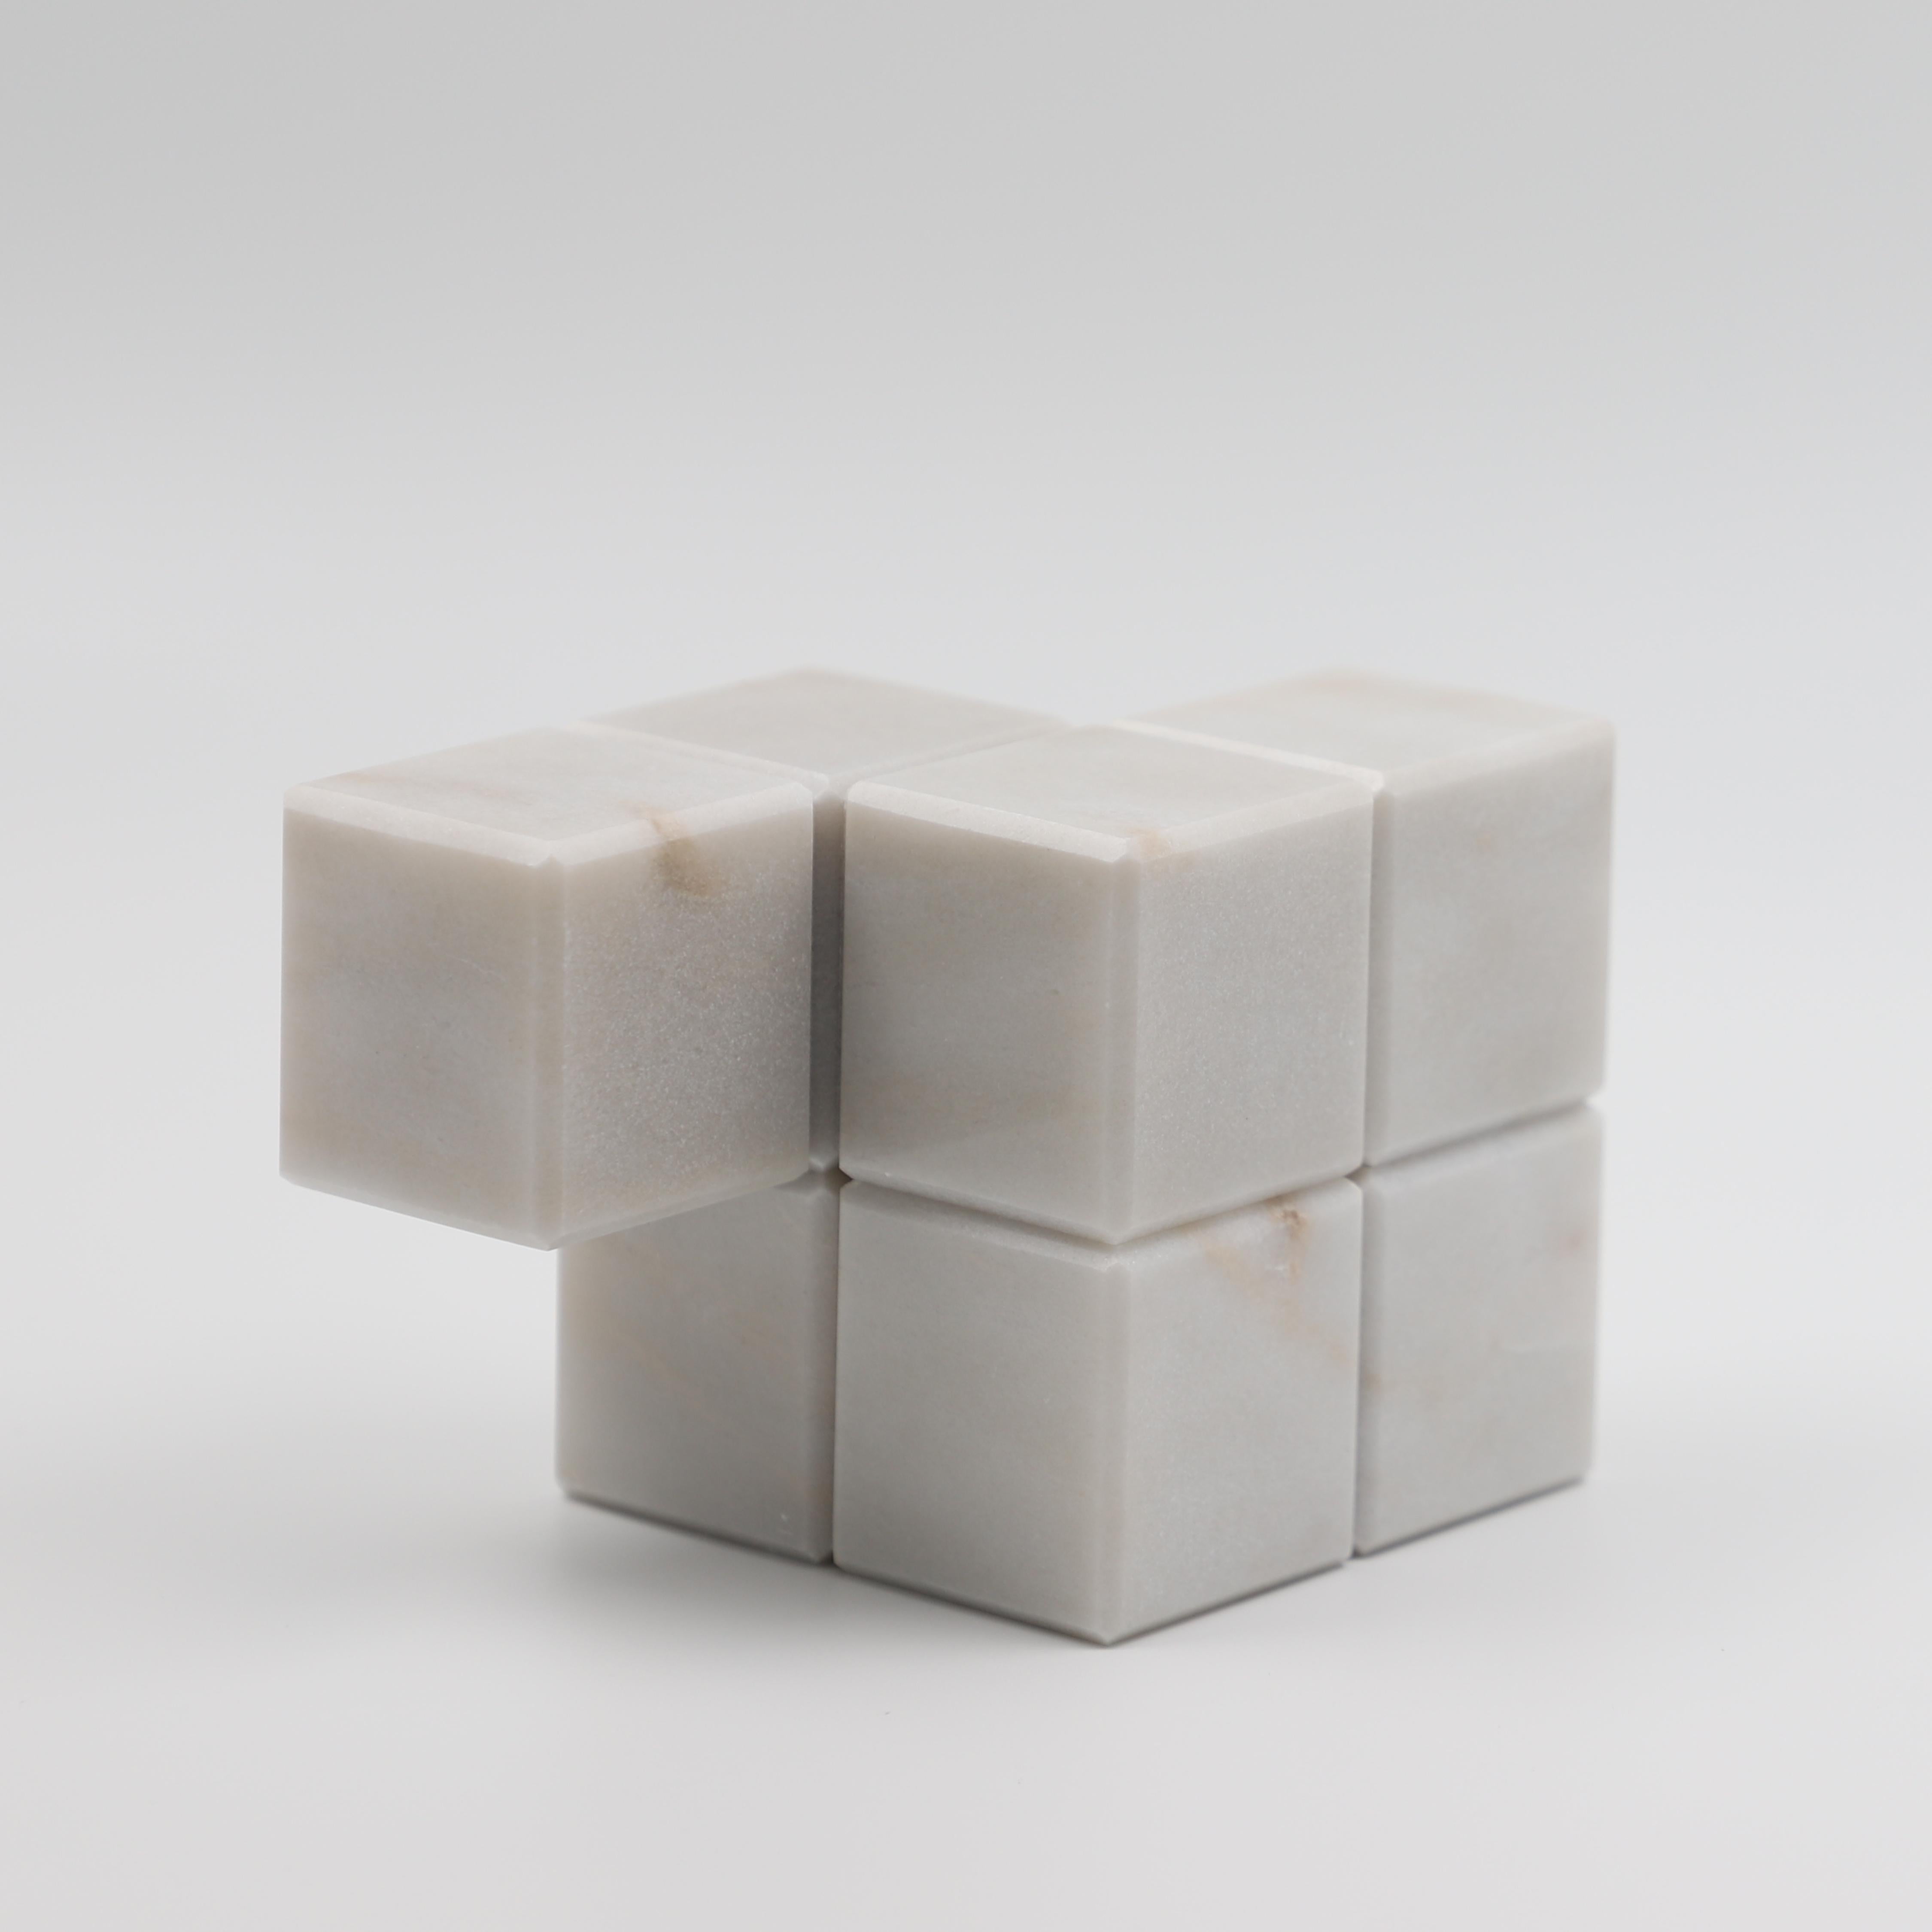 21st Century Minimalist Paperweight in Portuguese White Marble 